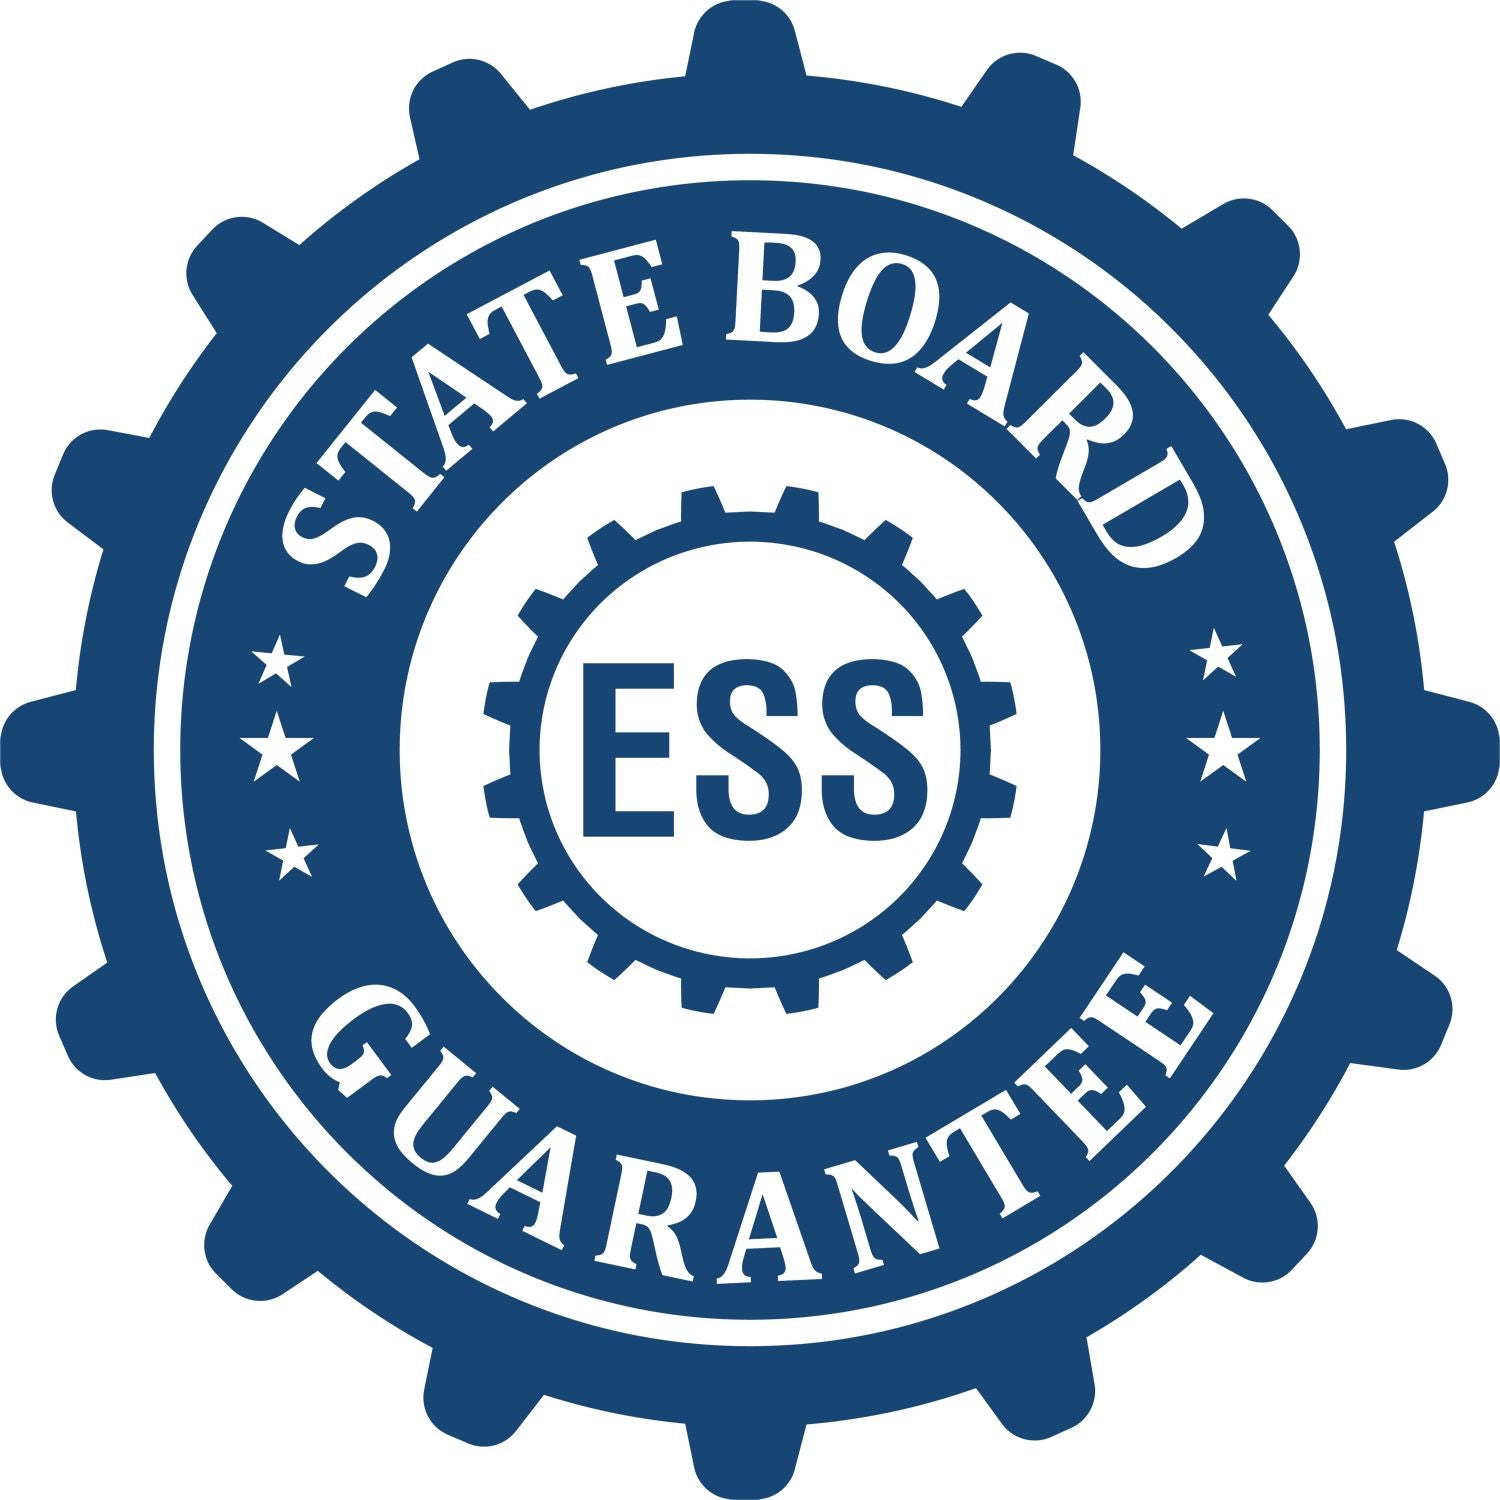 An emblem in a gear shape illustrating a state board guarantee for the Digital Minnesota PE Stamp and Electronic Seal for Minnesota Engineer product.